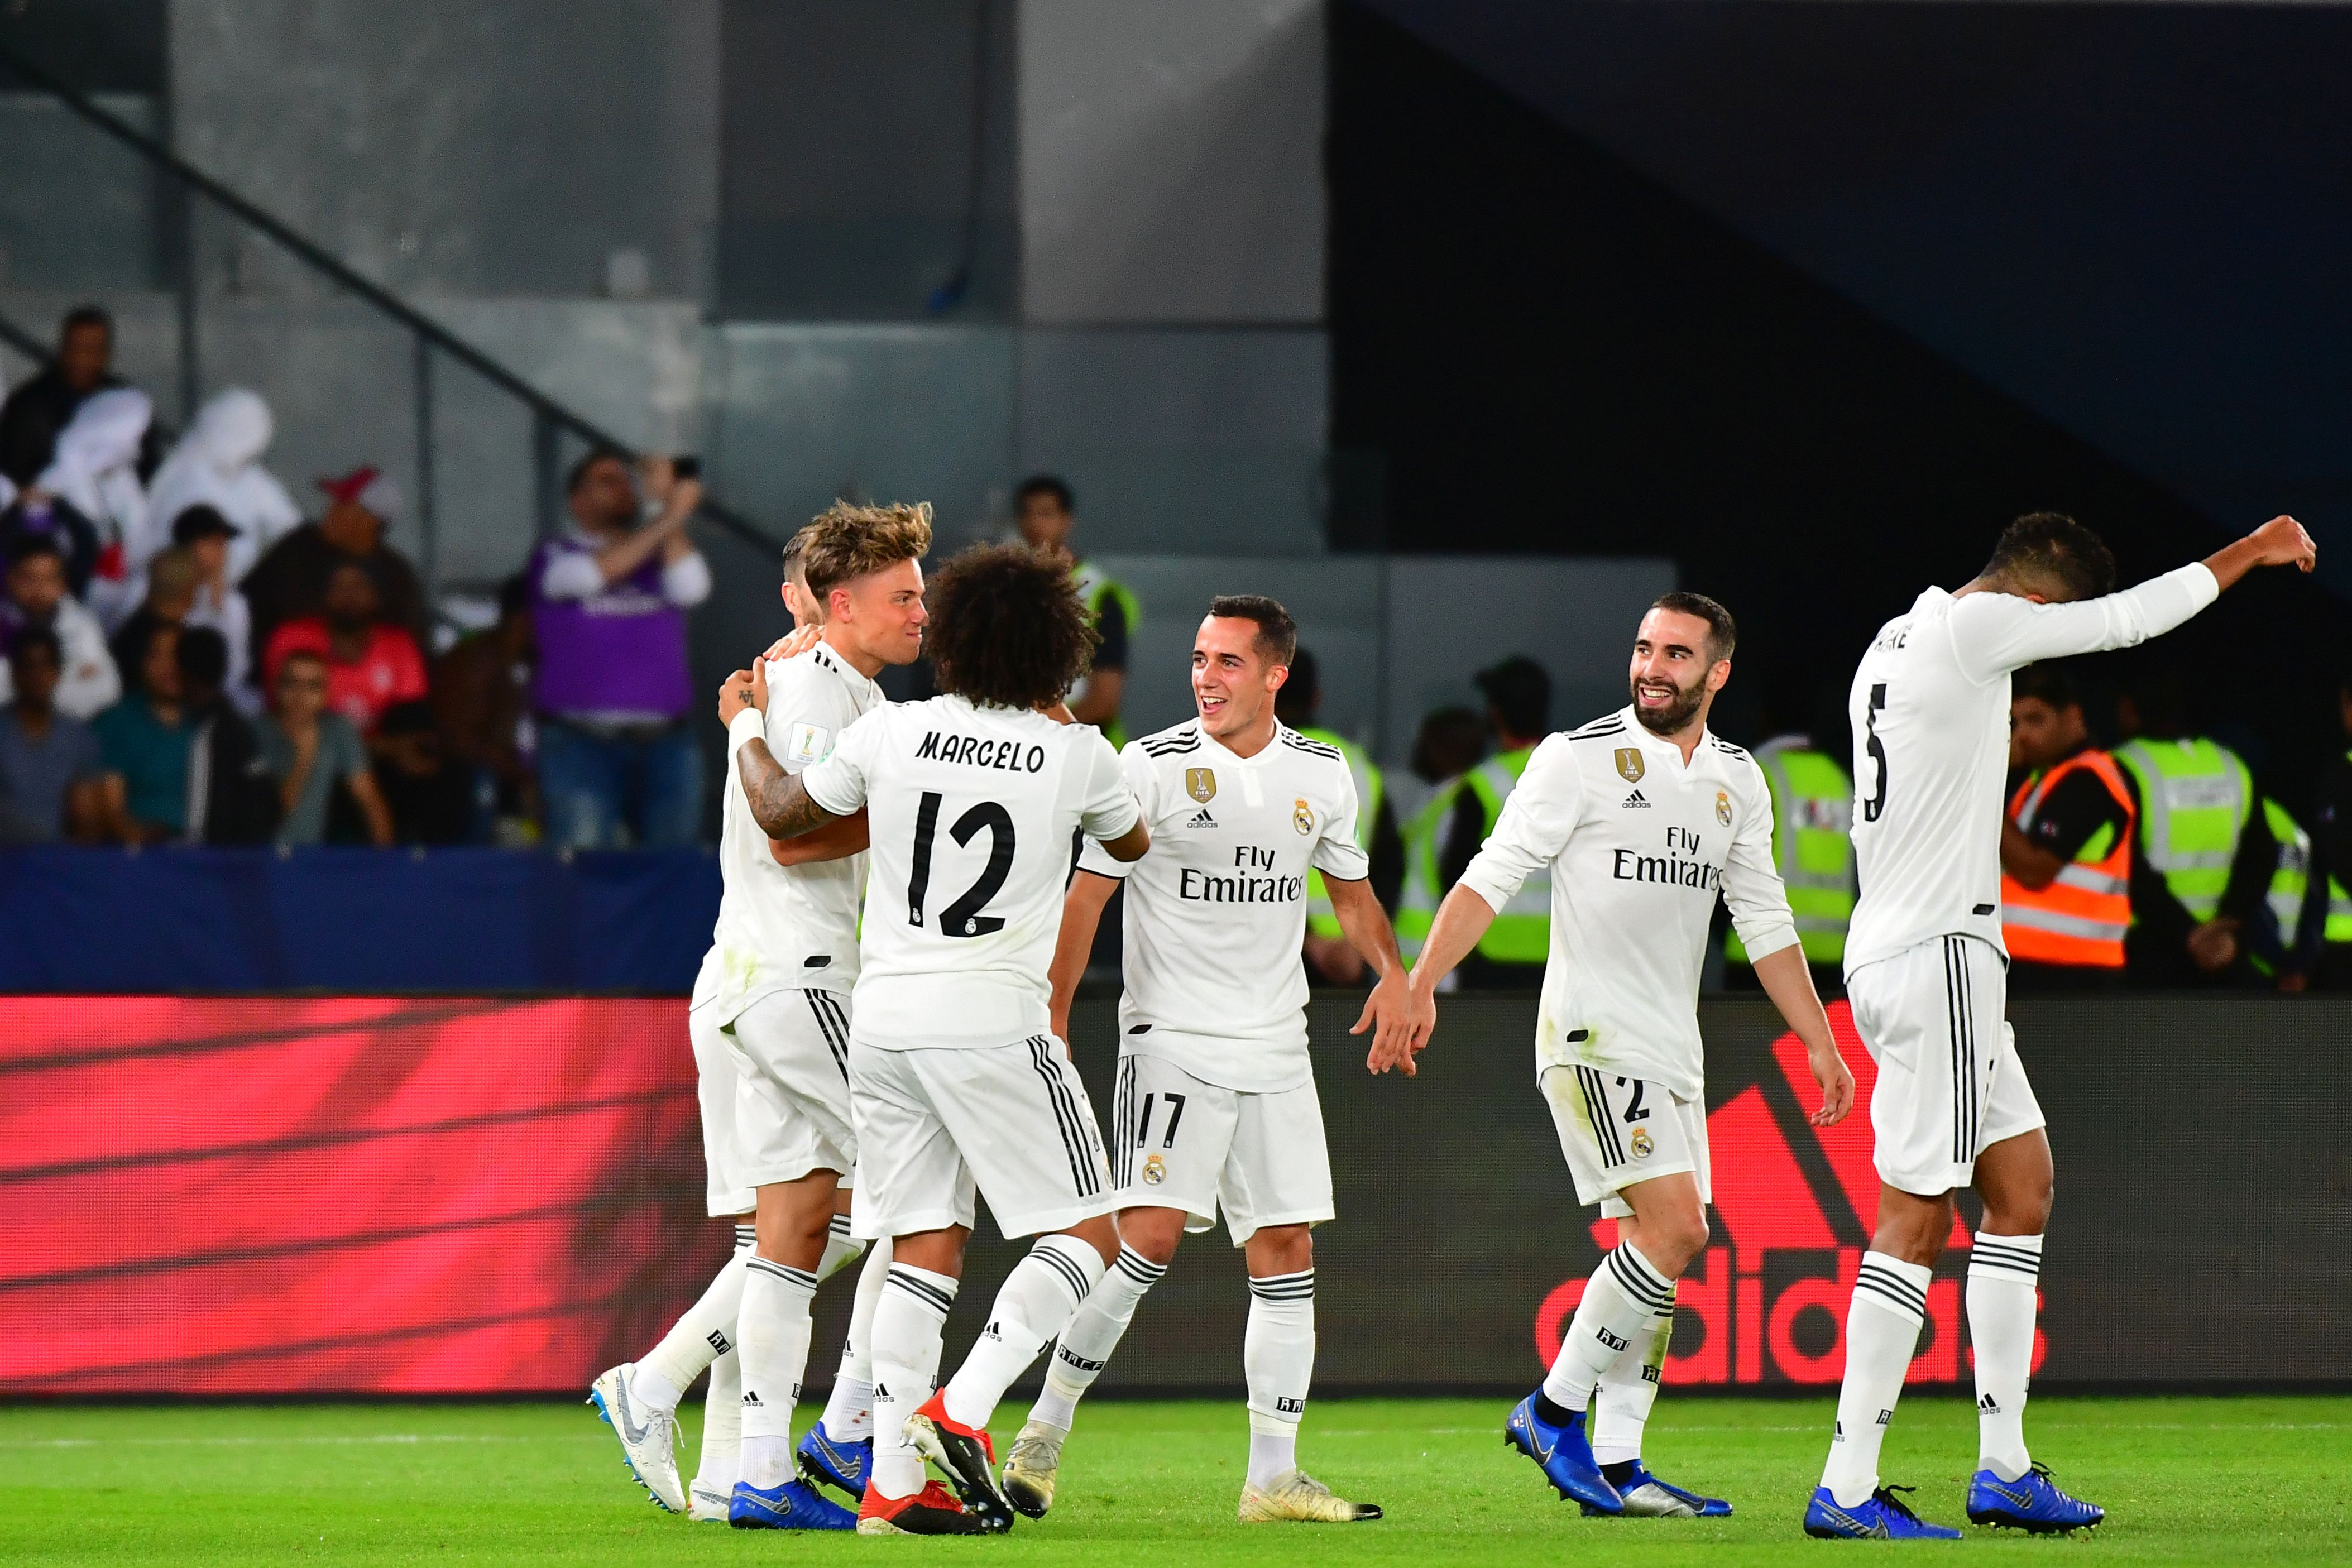 Real Madrid's Spanish midfielder Marcos Llorente (L) celebrates after scoring a goal during the FIFA Club World Cup final football match Spain's Real Madrid vs Abu Dhabi's Al Ain at the Zayed Sports City Stadium in Abu Dhabi, the capital of the United Arab Emirates, on December 22, 2018. (Photo by Giuseppe CACACE / AFP)        (Photo credit should read GIUSEPPE CACACE/AFP/Getty Images)